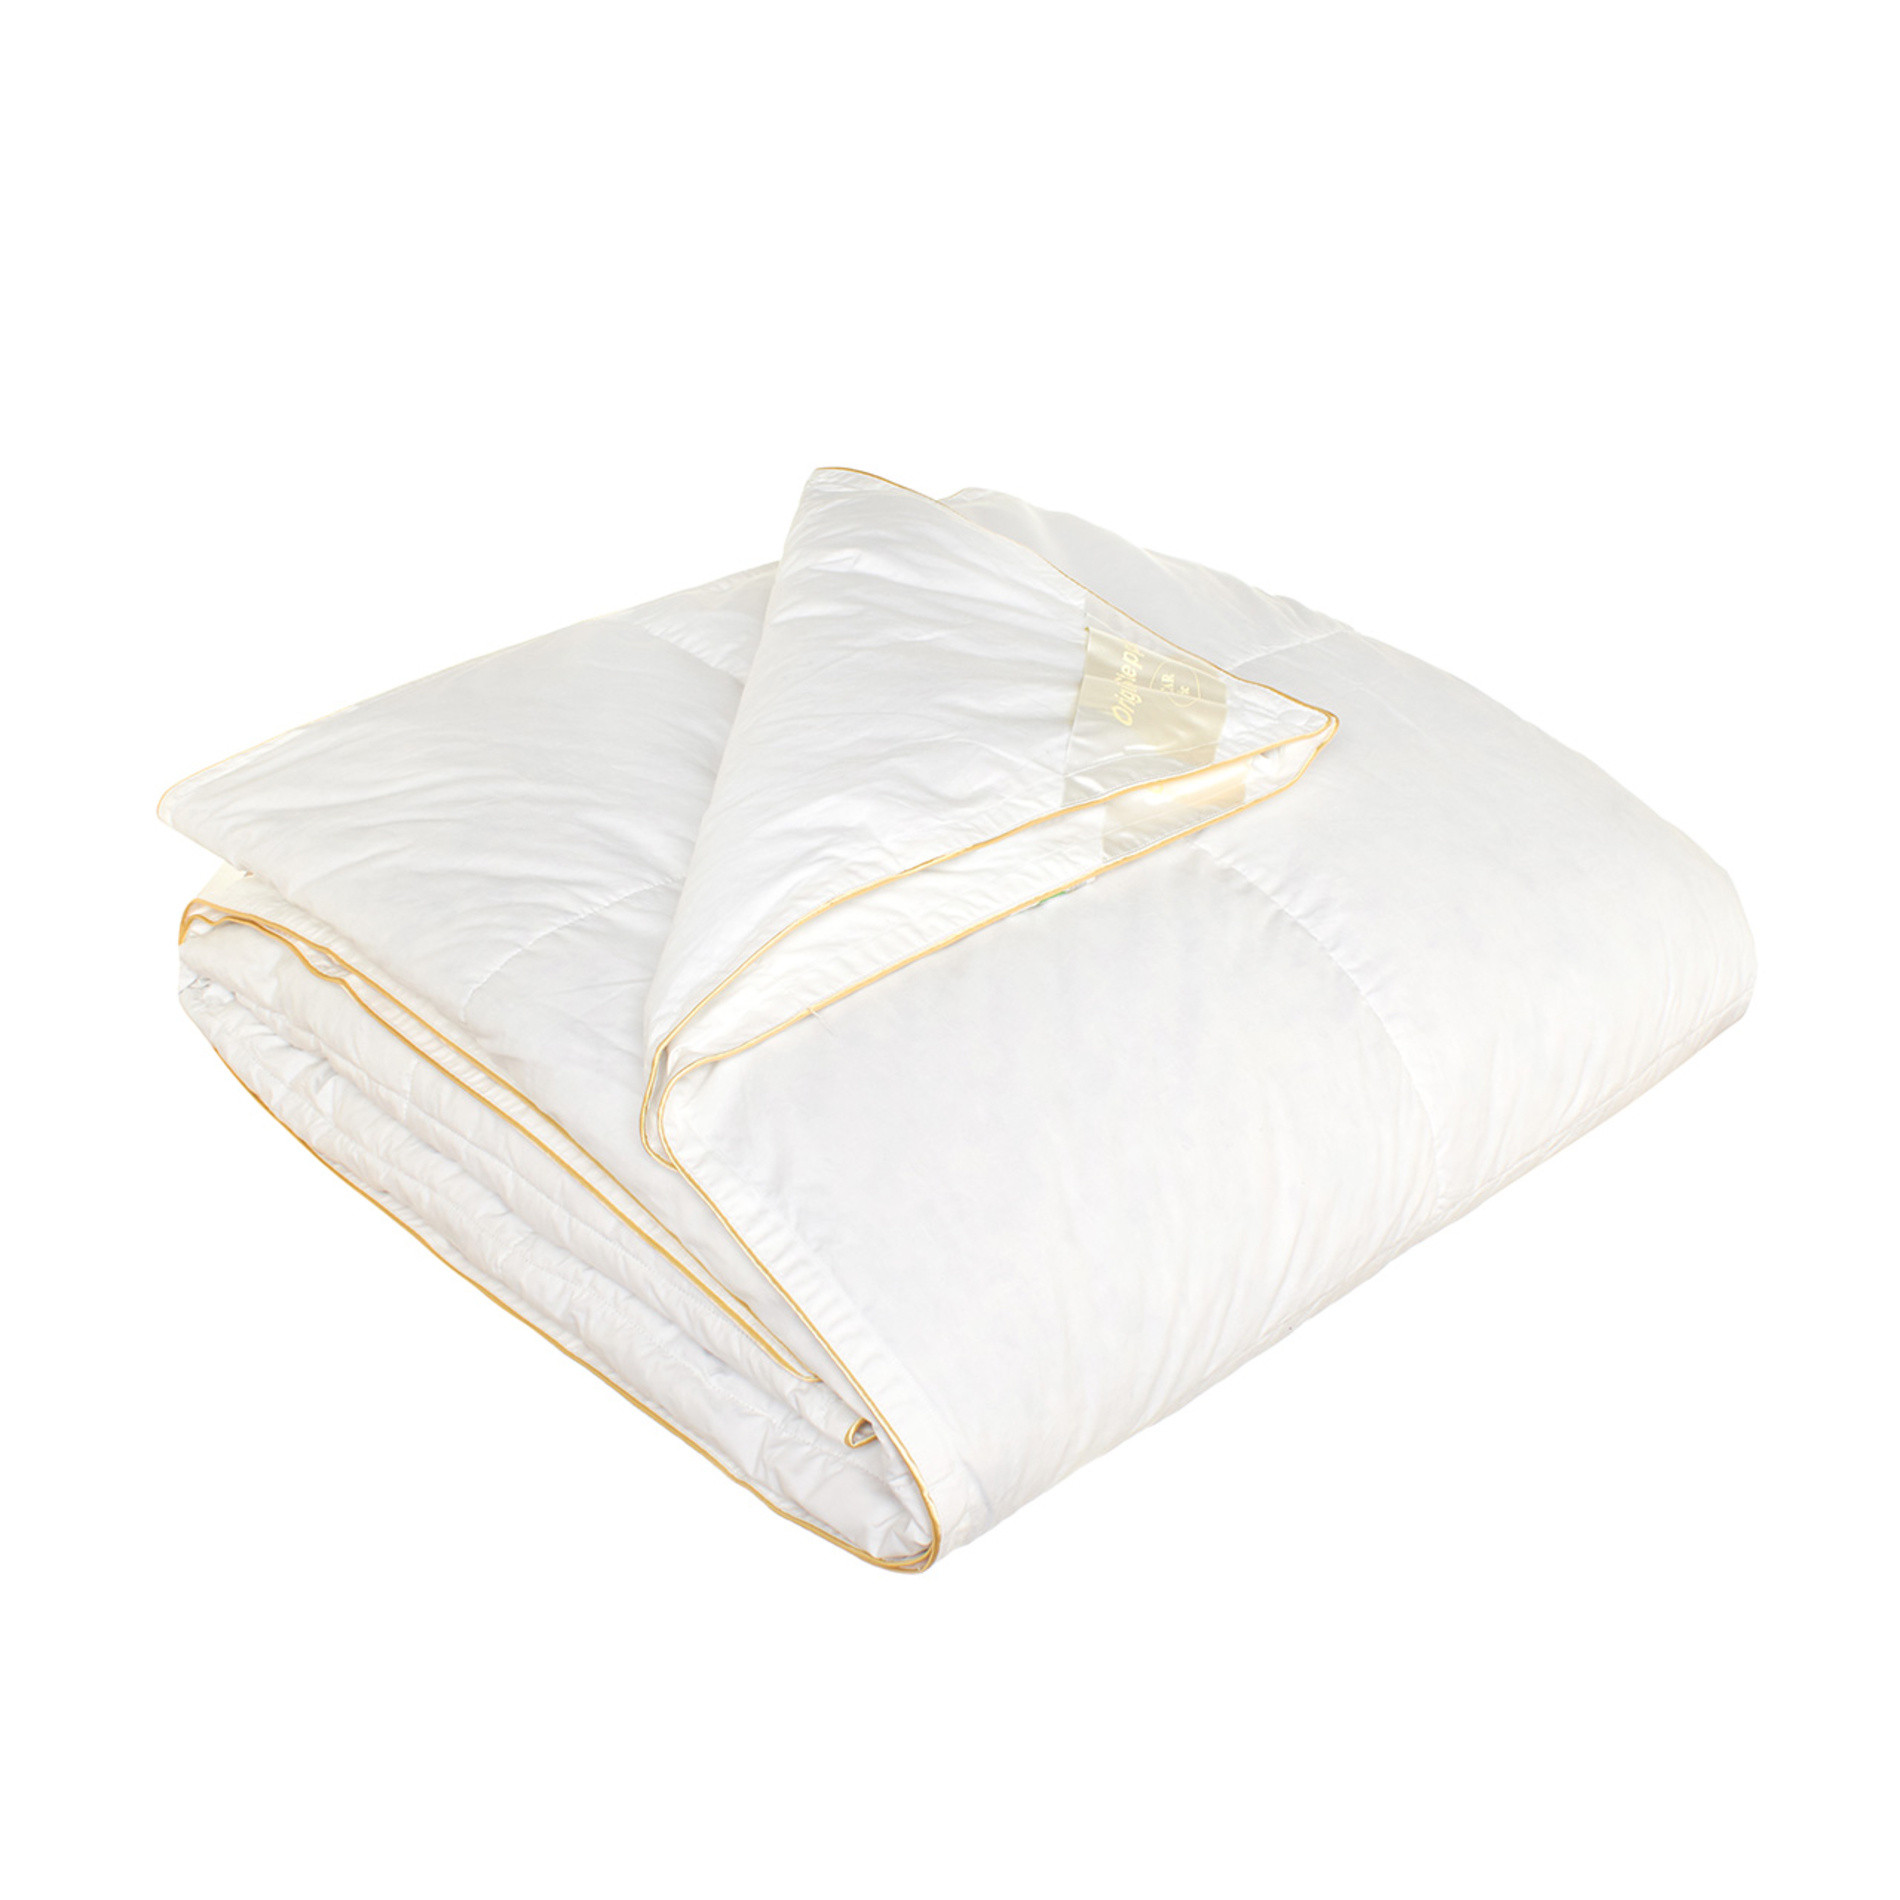 4-season cotton duvet with natural feather padding, White, large image number 0